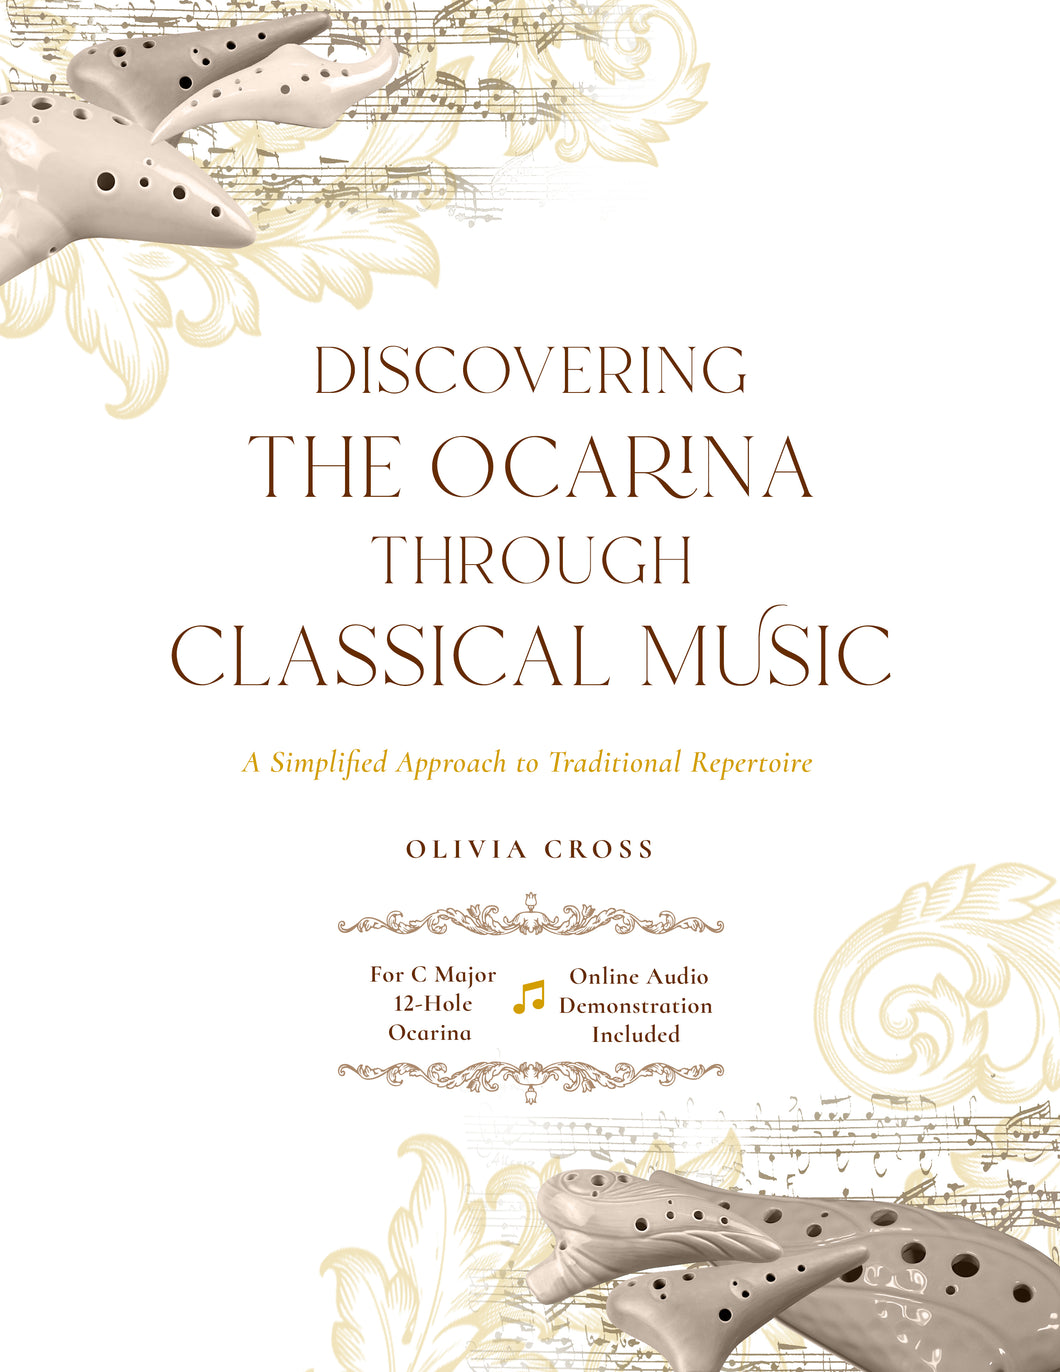 Discovering The Ocarina Through Classical Music - A Simplified Approach To Traditional Repertoire